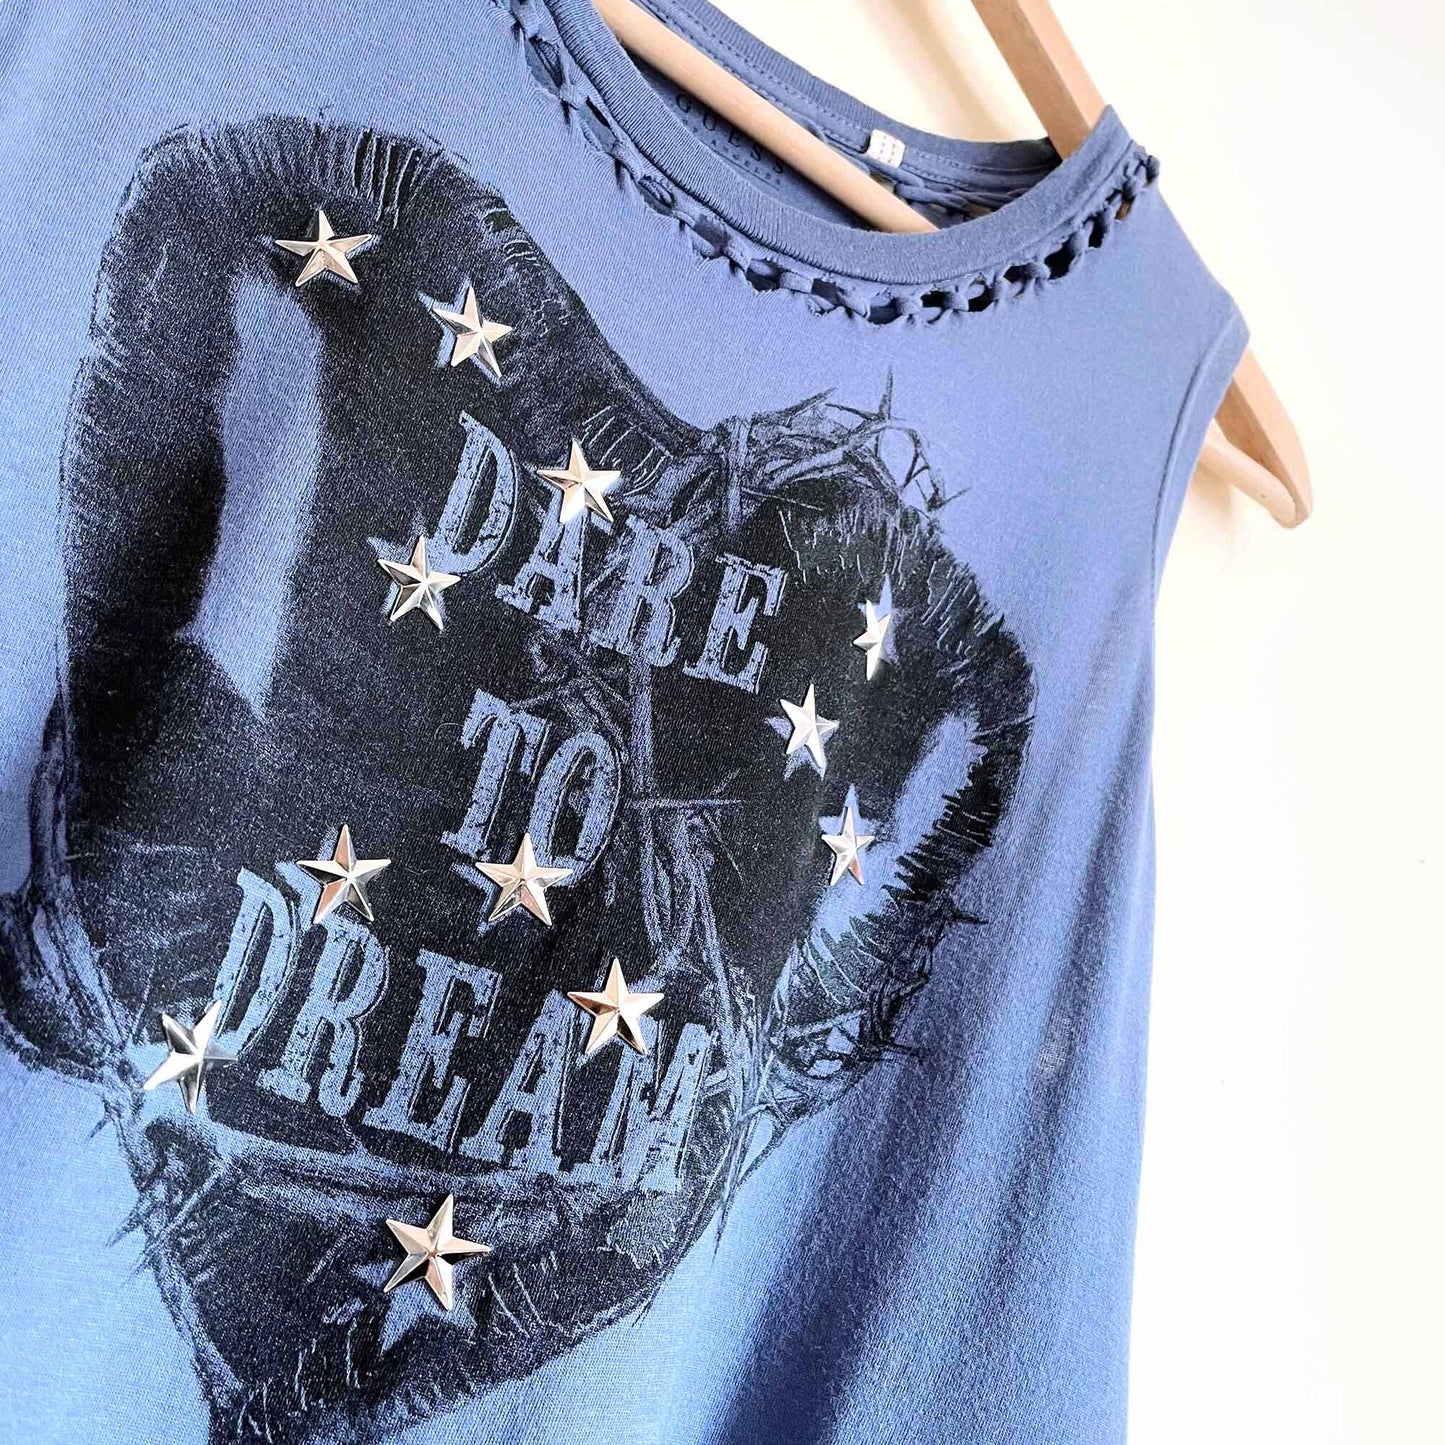 Guess festival fringe Dare to Dream studded crop top - size Medium